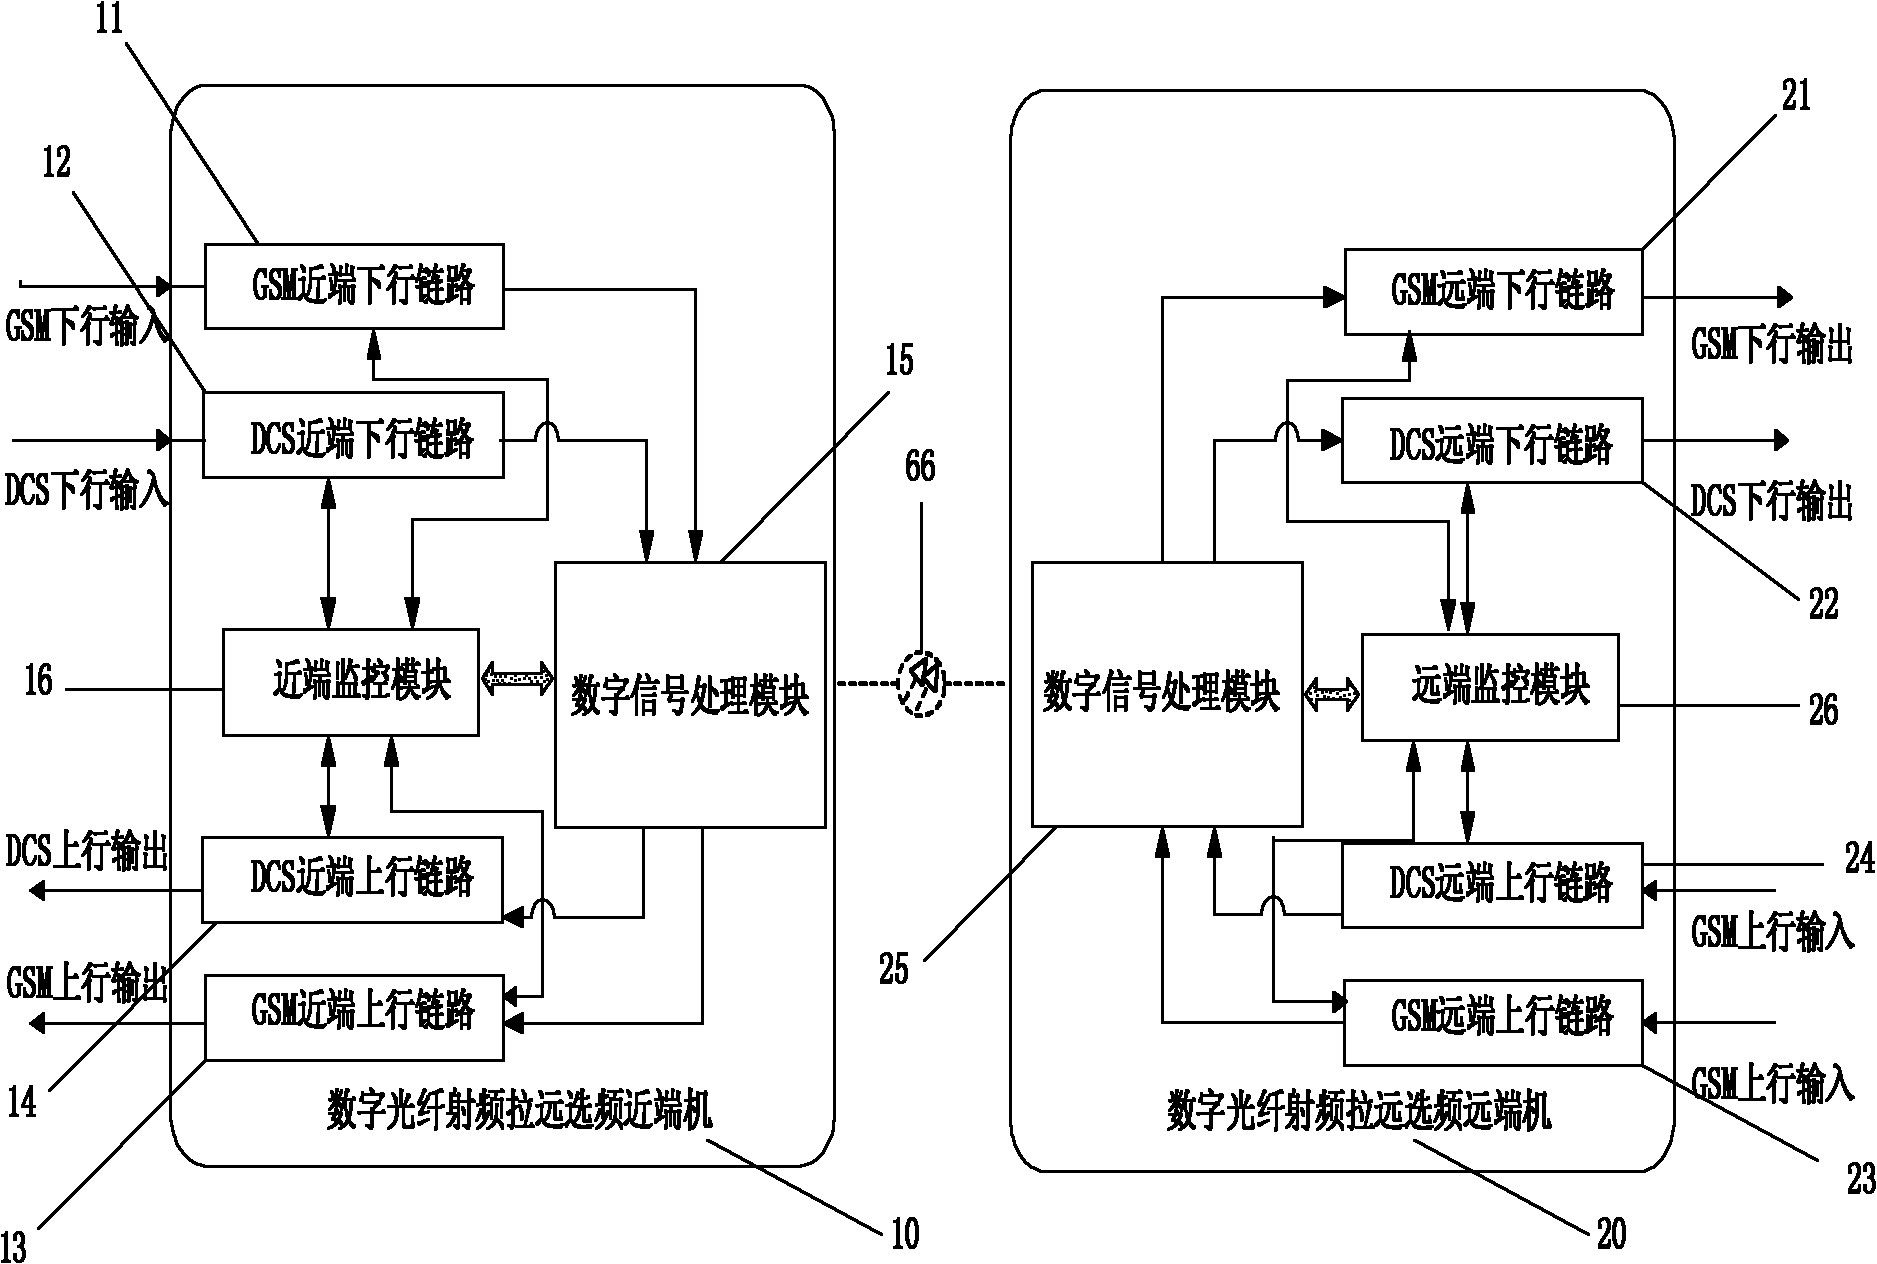 Digital radio-frequency remote system applied to double-communication system